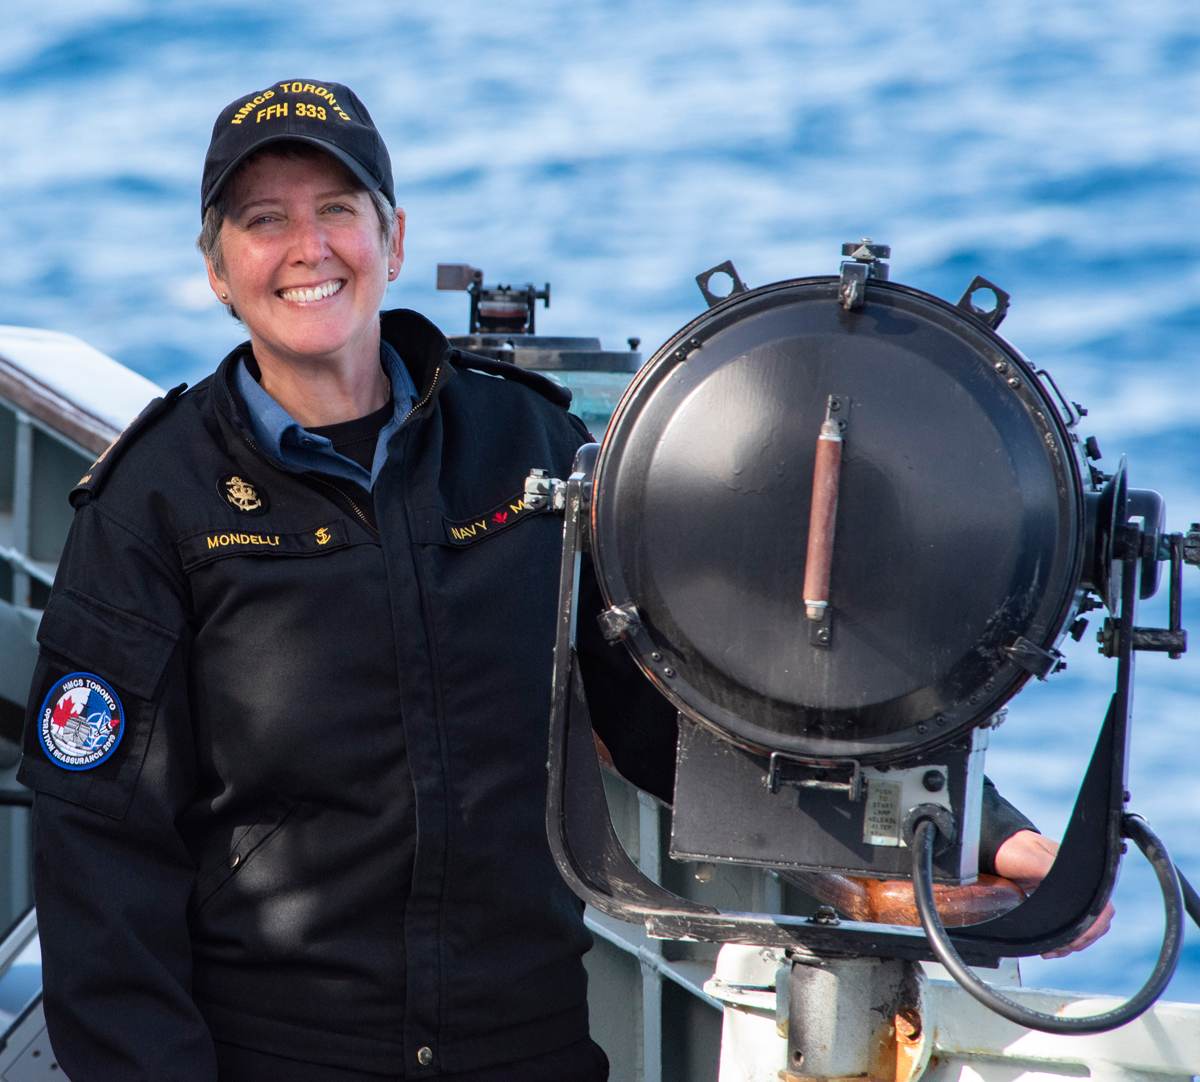 CPO1 Alena Mondelli is seen at sea during an Operation Reassurance deployment with HMCS  Toronto in 2019. Photo by MCpl Manuela Berger, FIS